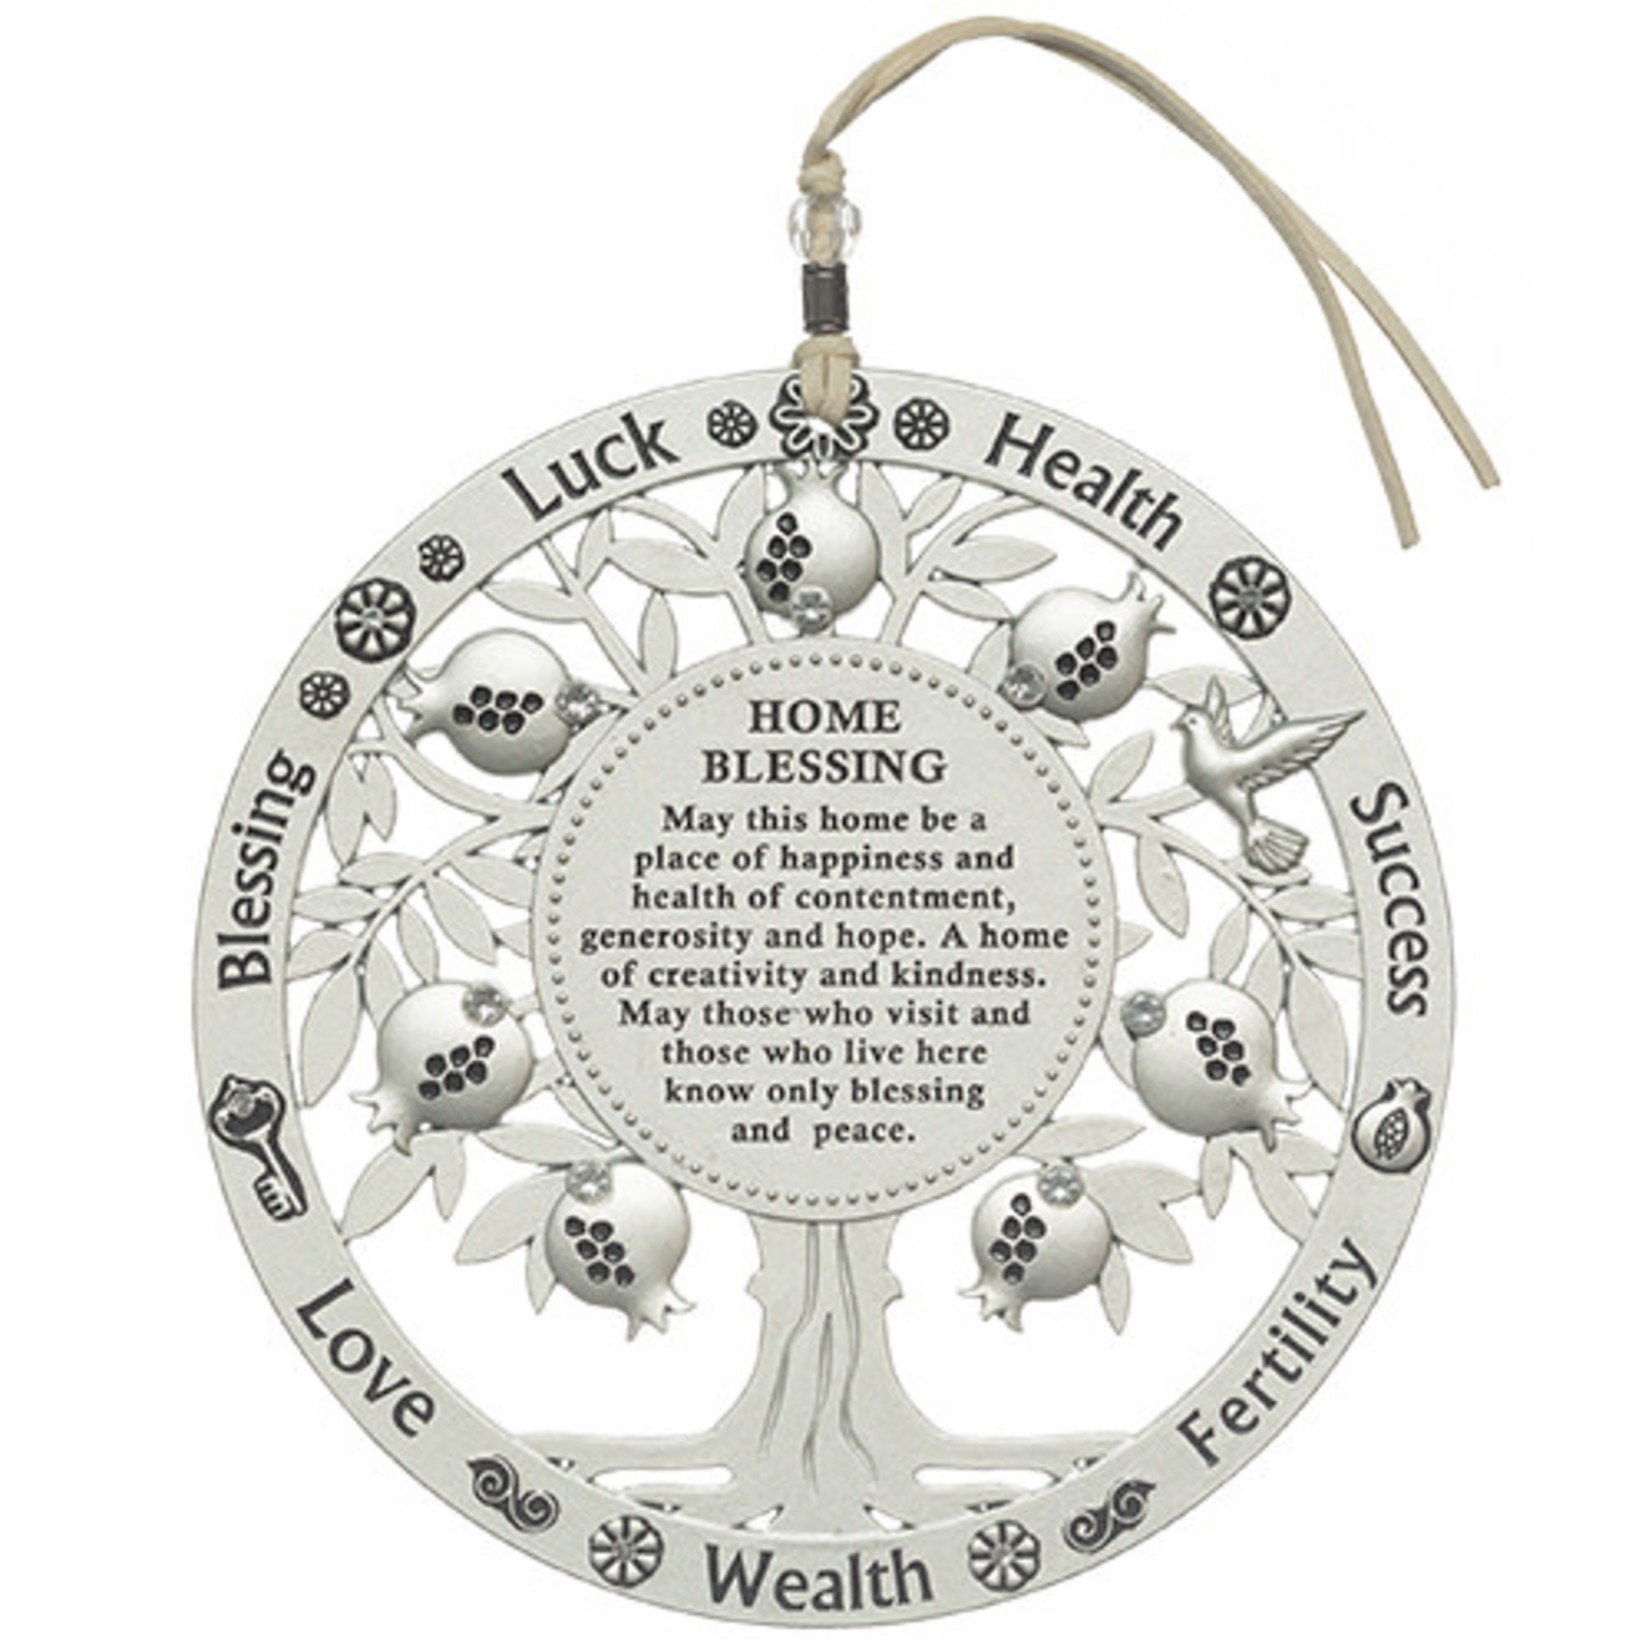 Metal Tree Of Blessings - English Home Blessing